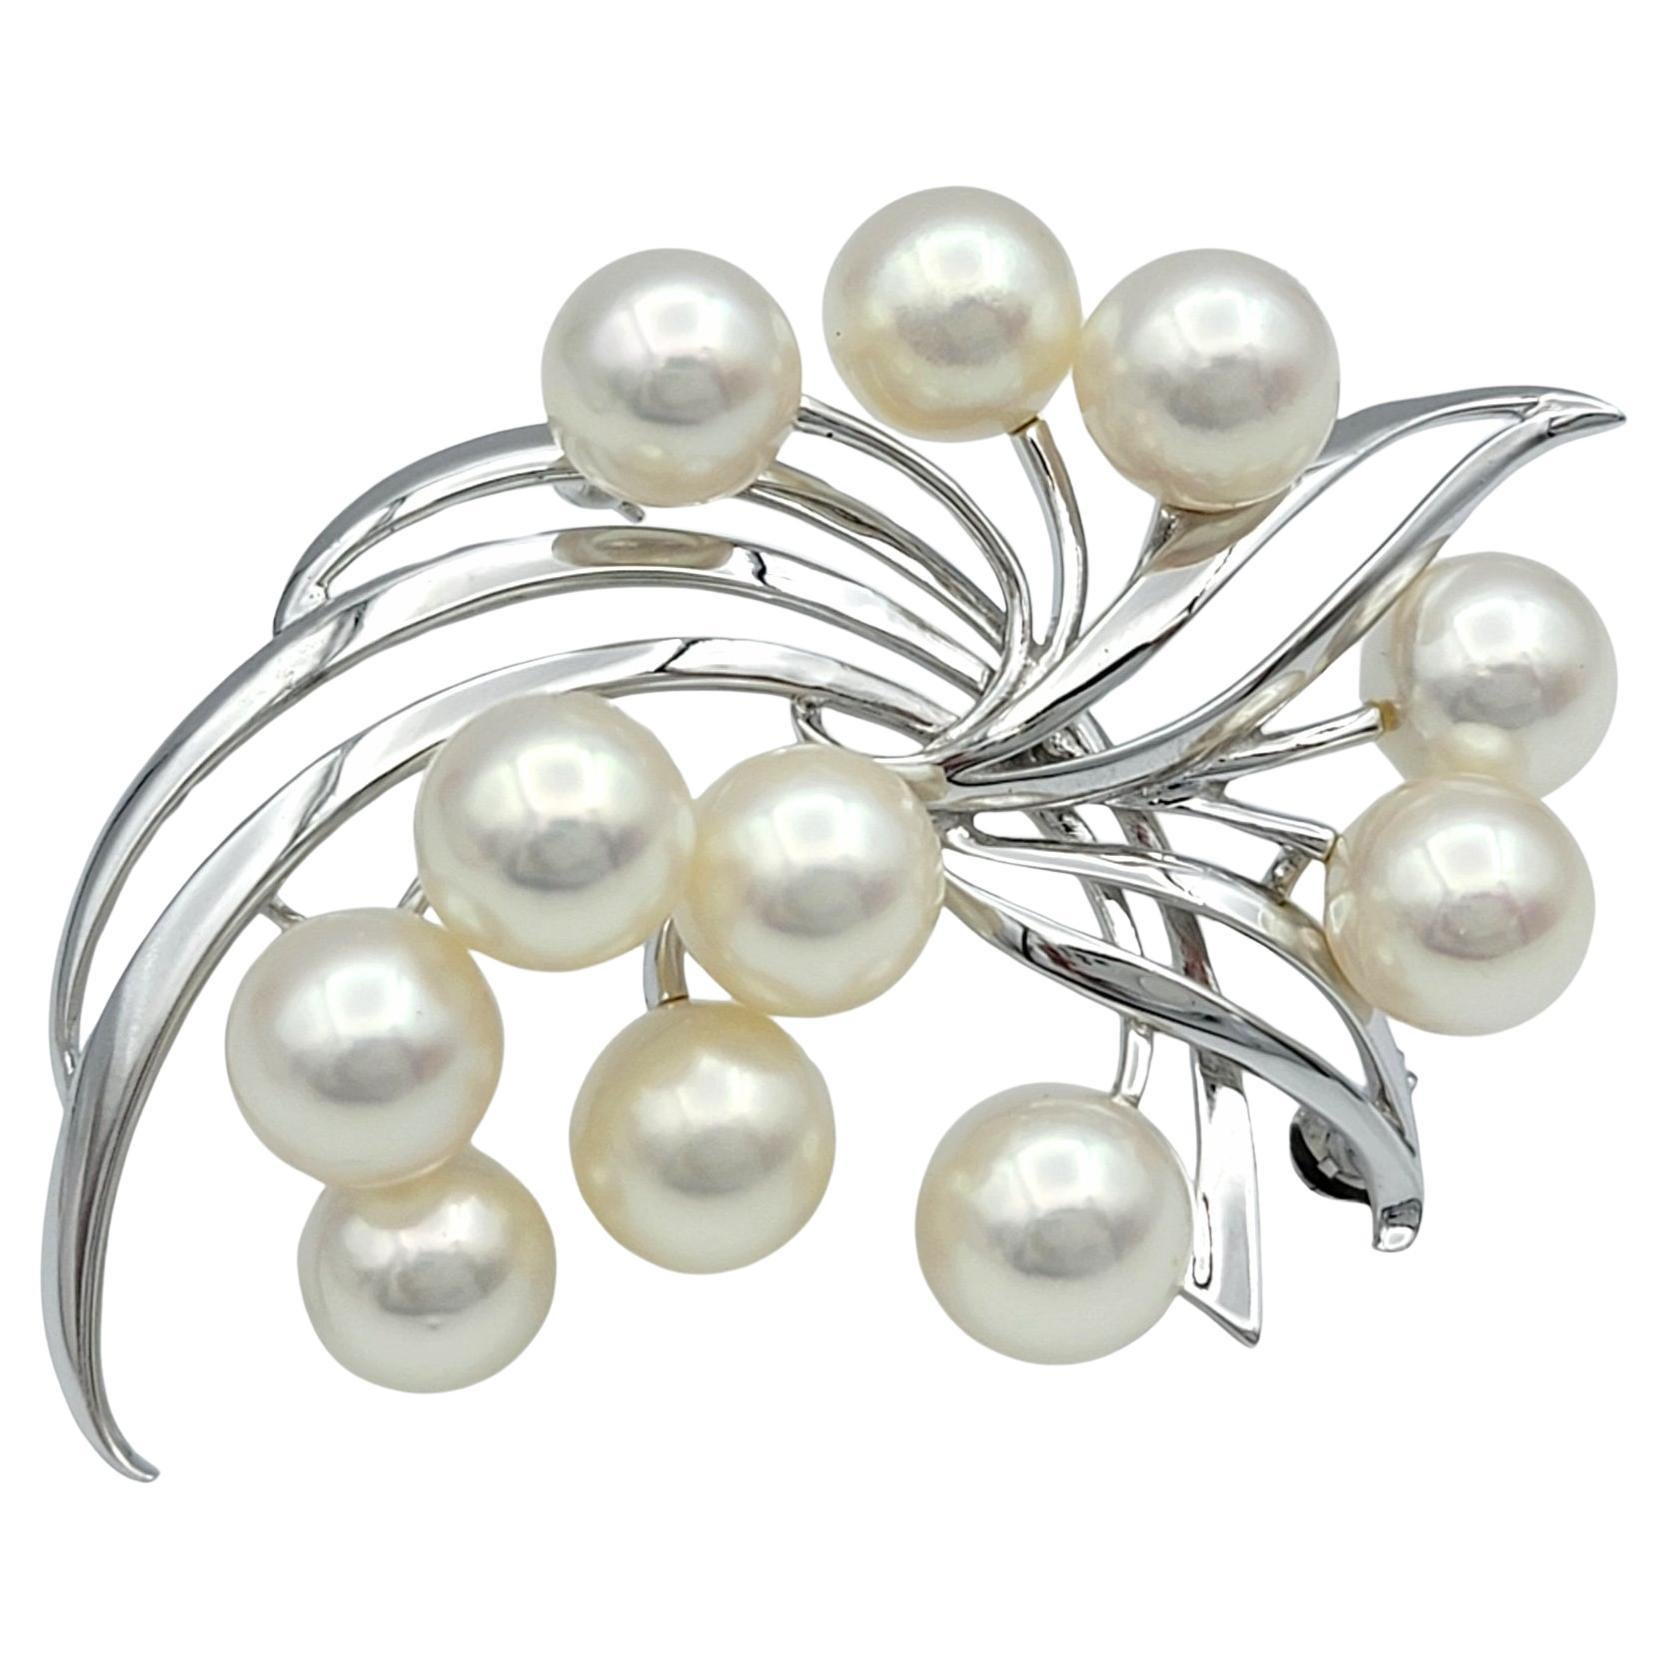 Mikimoto White Akoya Cultured Pearl Spray Brooch Set in 14 Karat White Gold For Sale